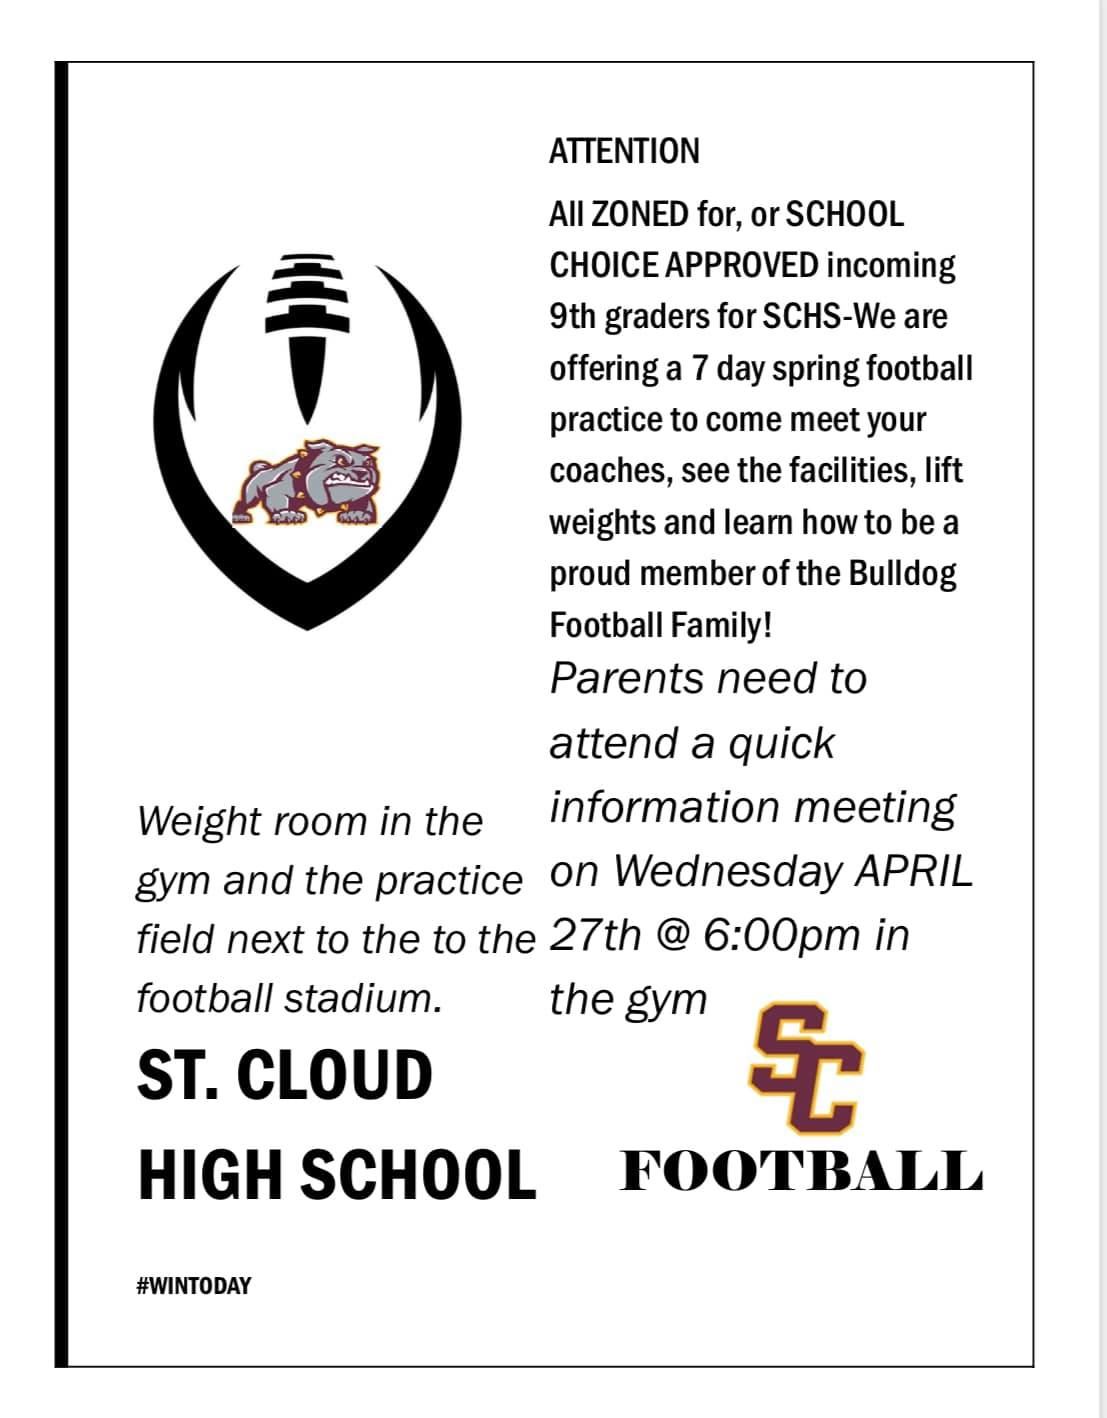  Flyer that says 7 day spring football practice for incoming 9th graders